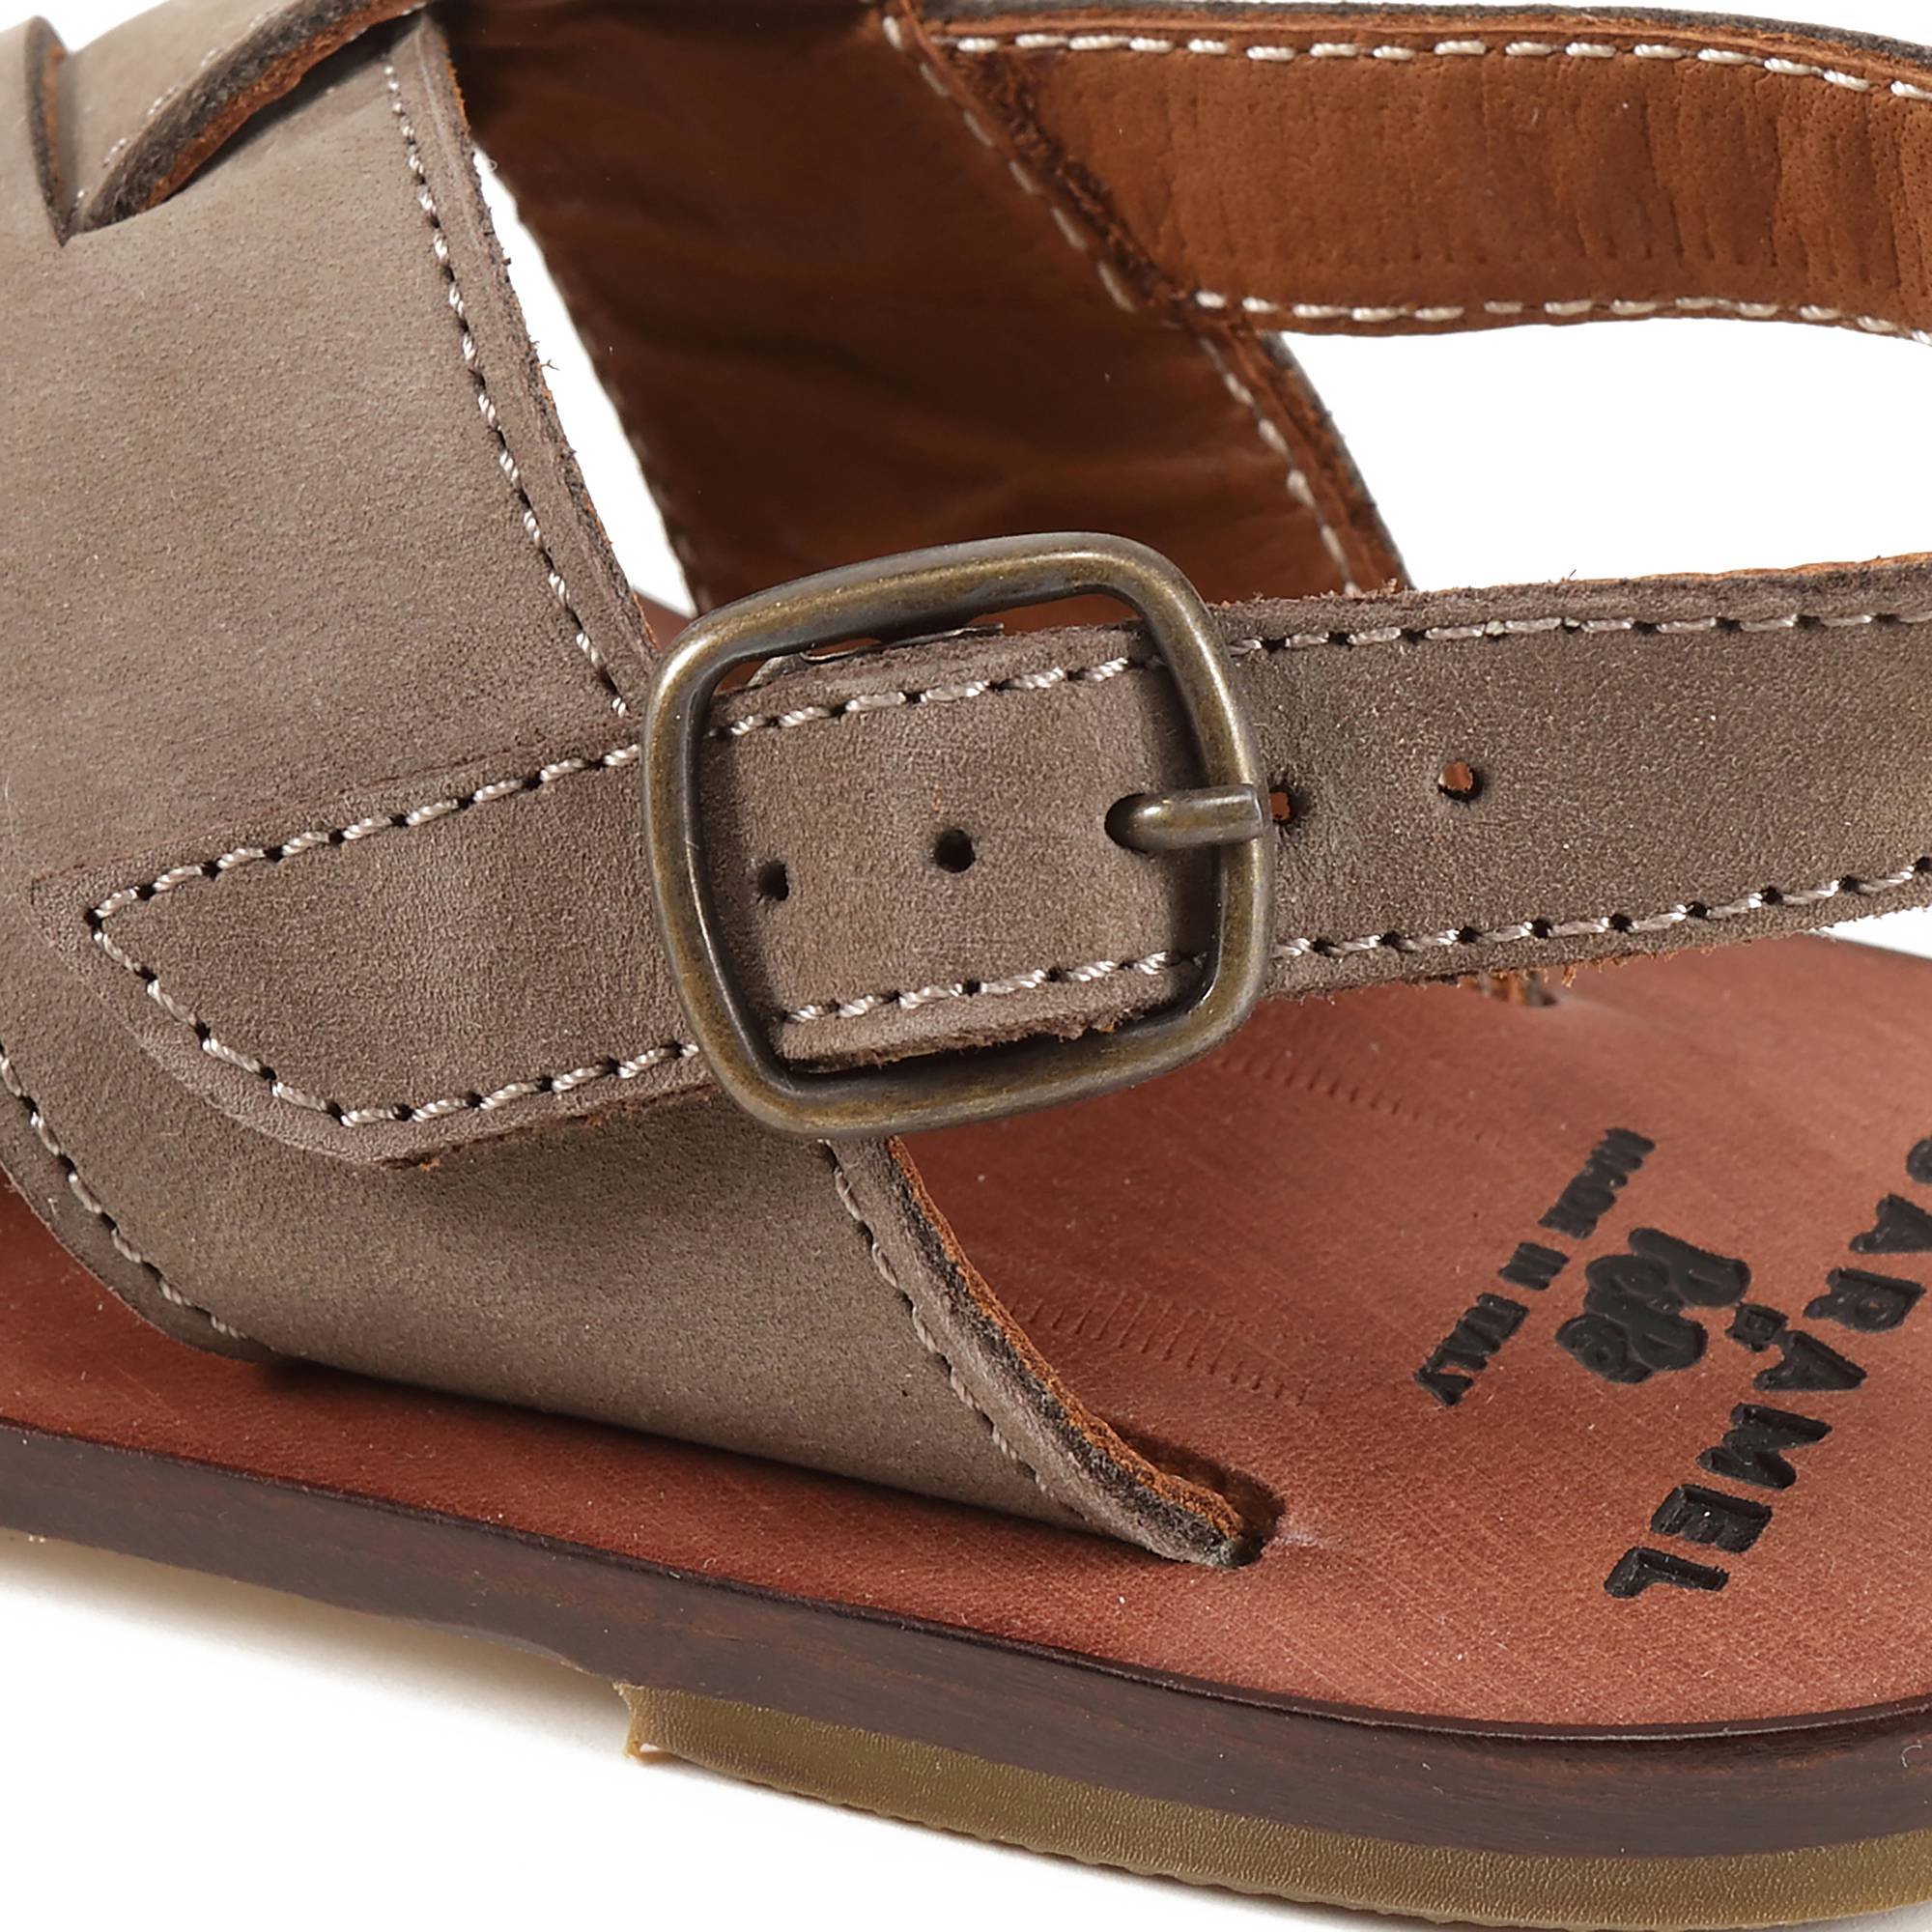 Baby Boys & Girls Brown Leather Sandals